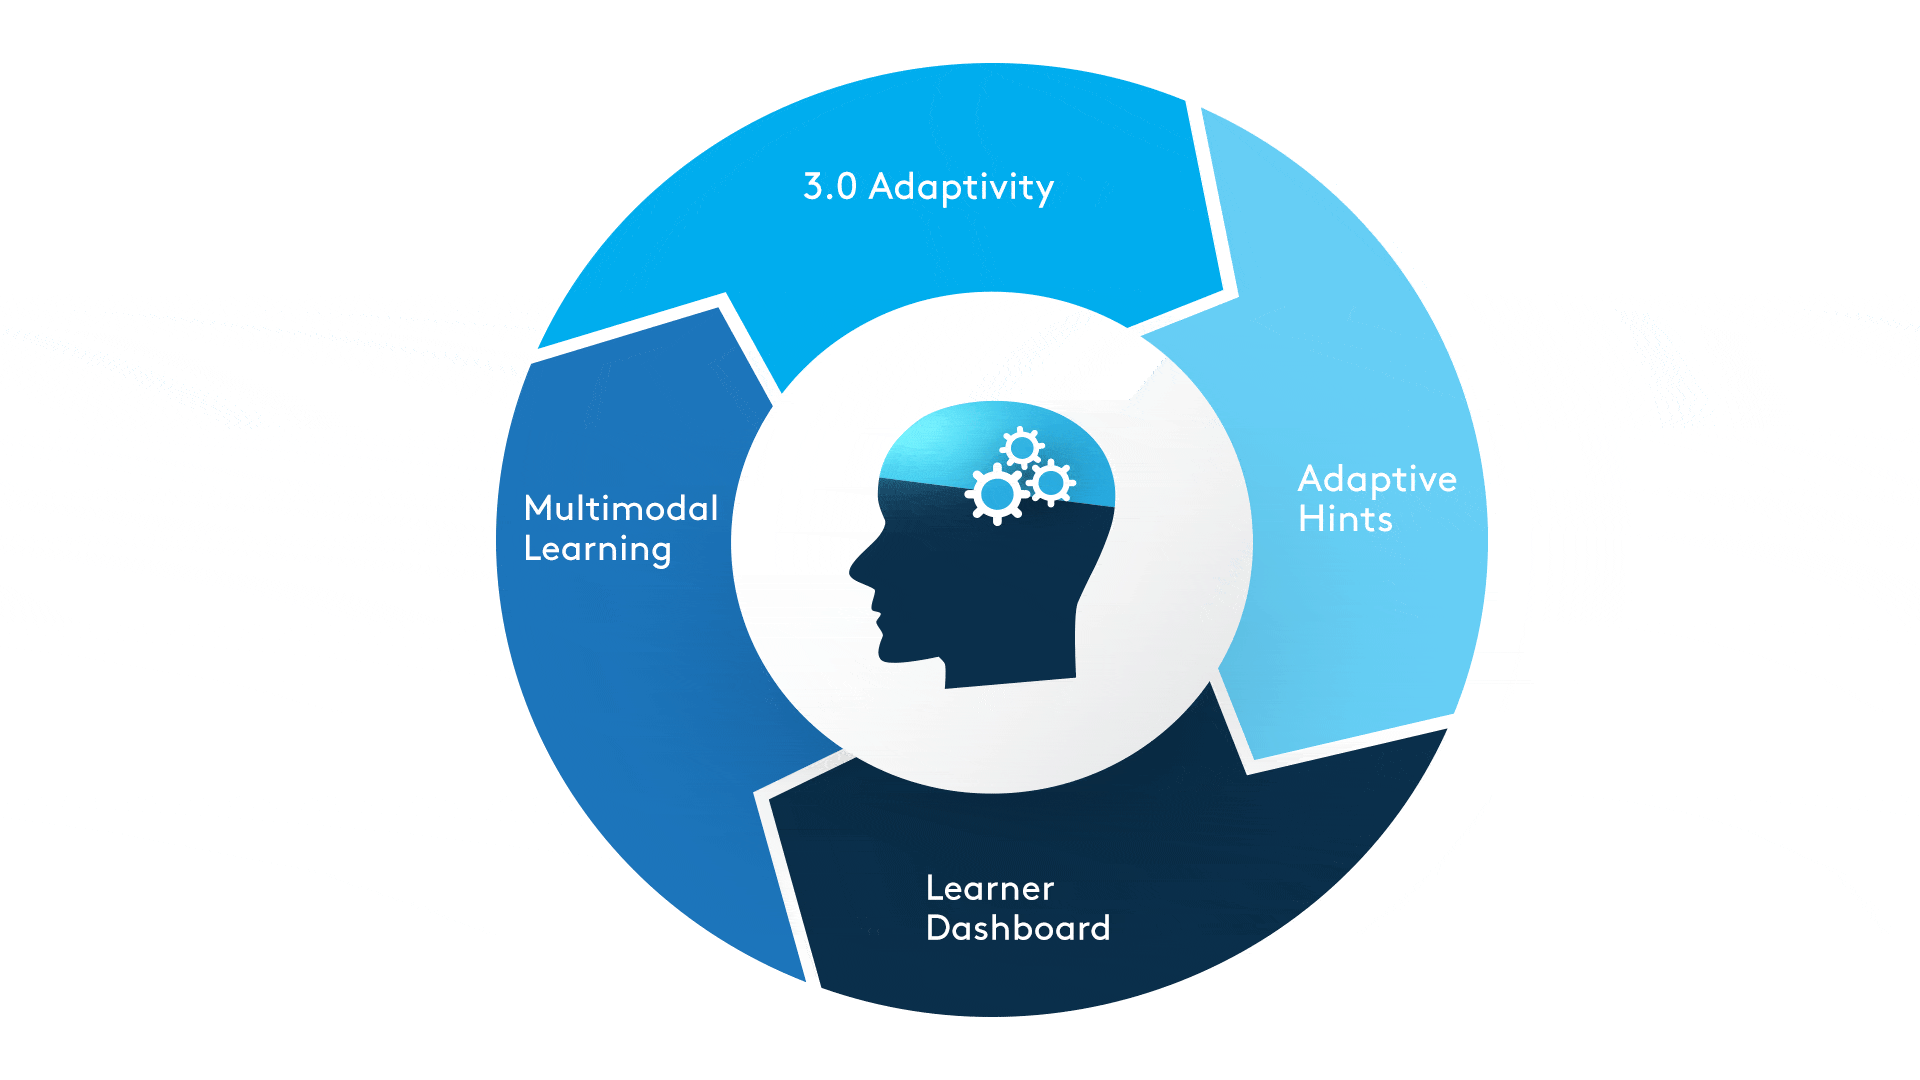 Learner-centric features